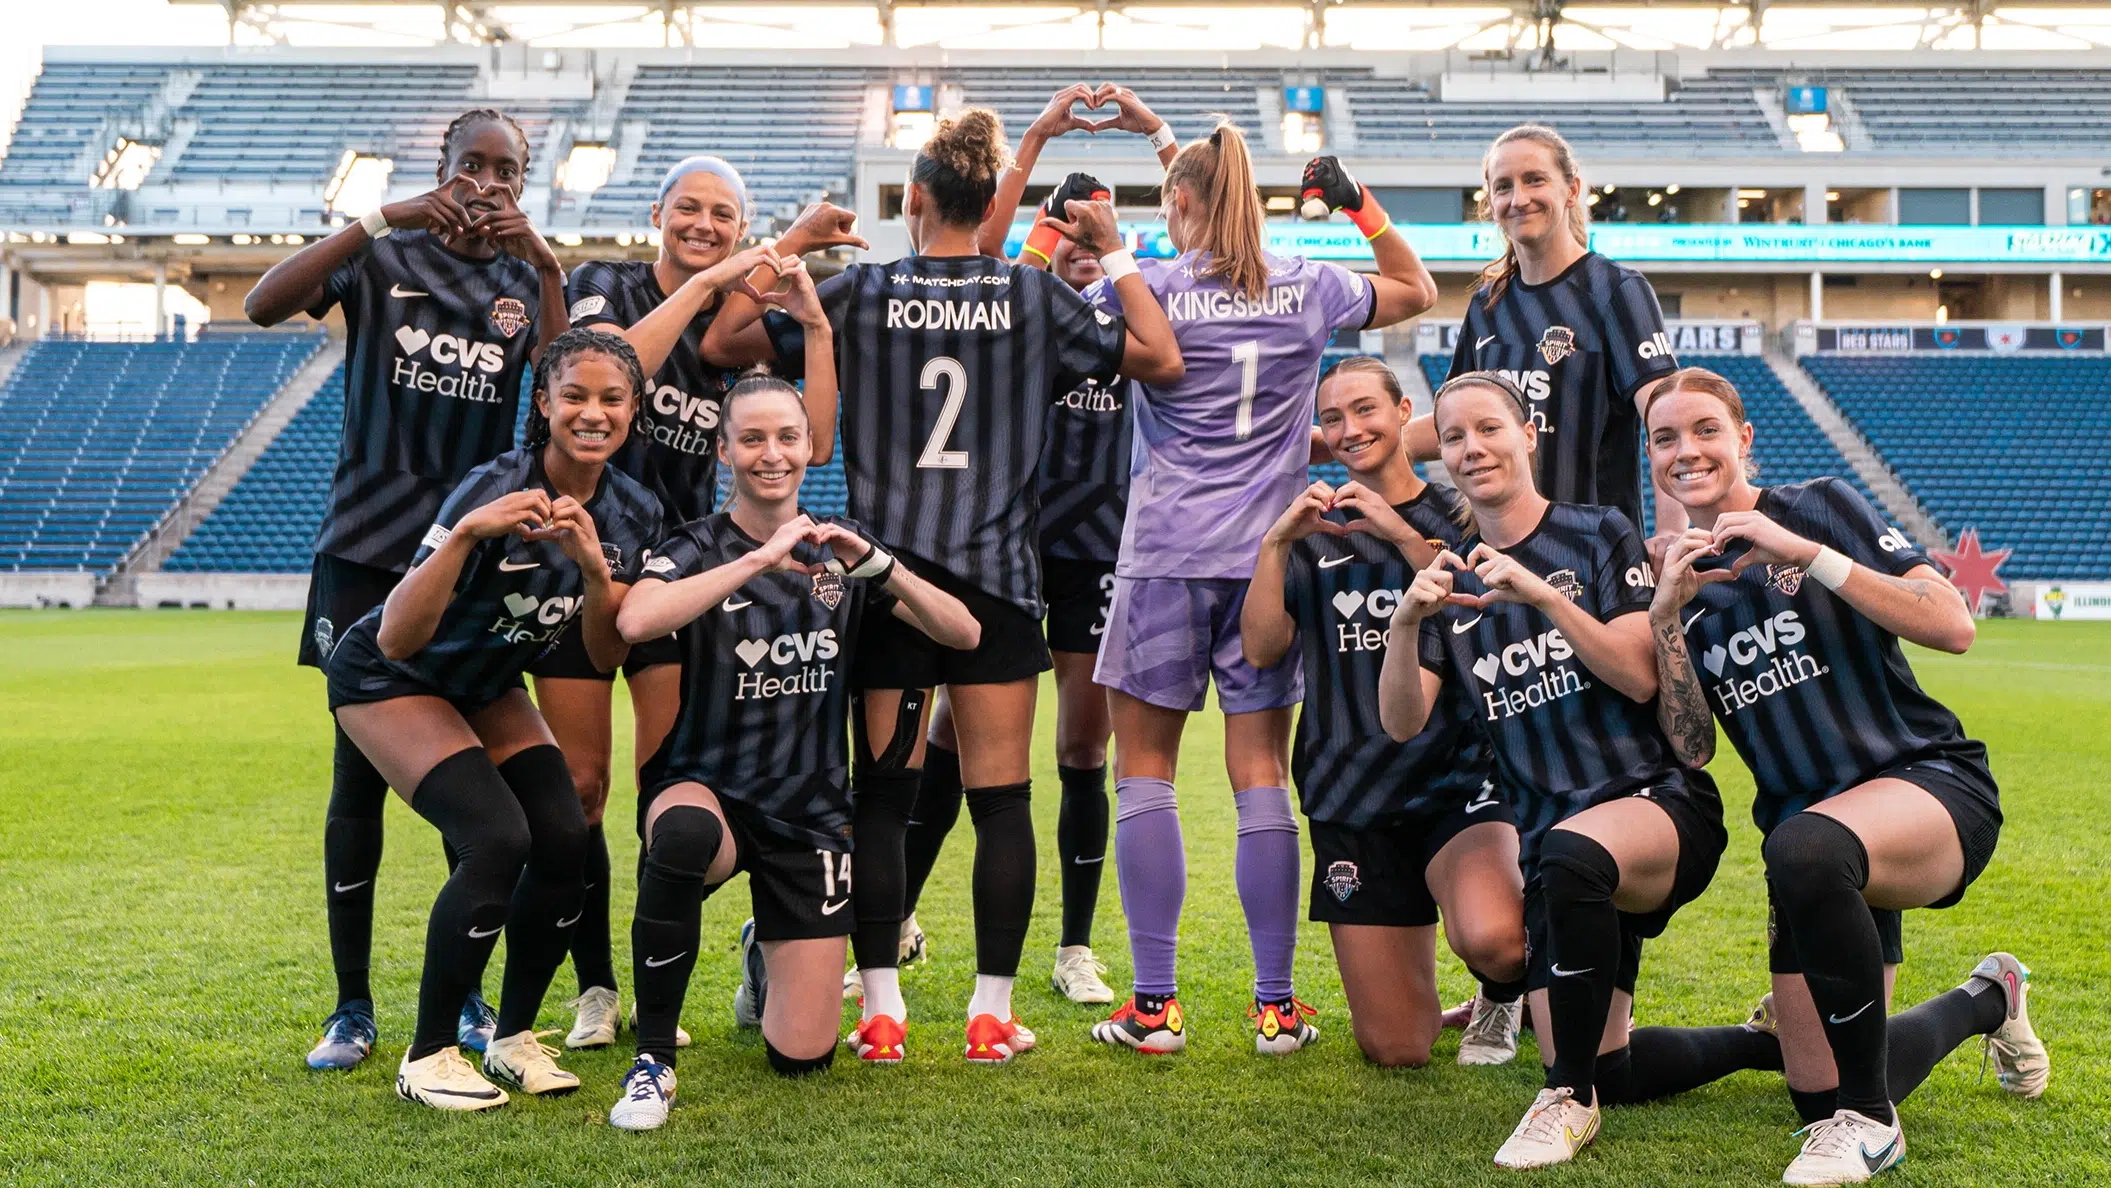 The starting XI of the Spirit hold up heart shapes with their hands as Trinity Rodman #2 and Aubrey Kingsbury #1 face away from the camera in the center.